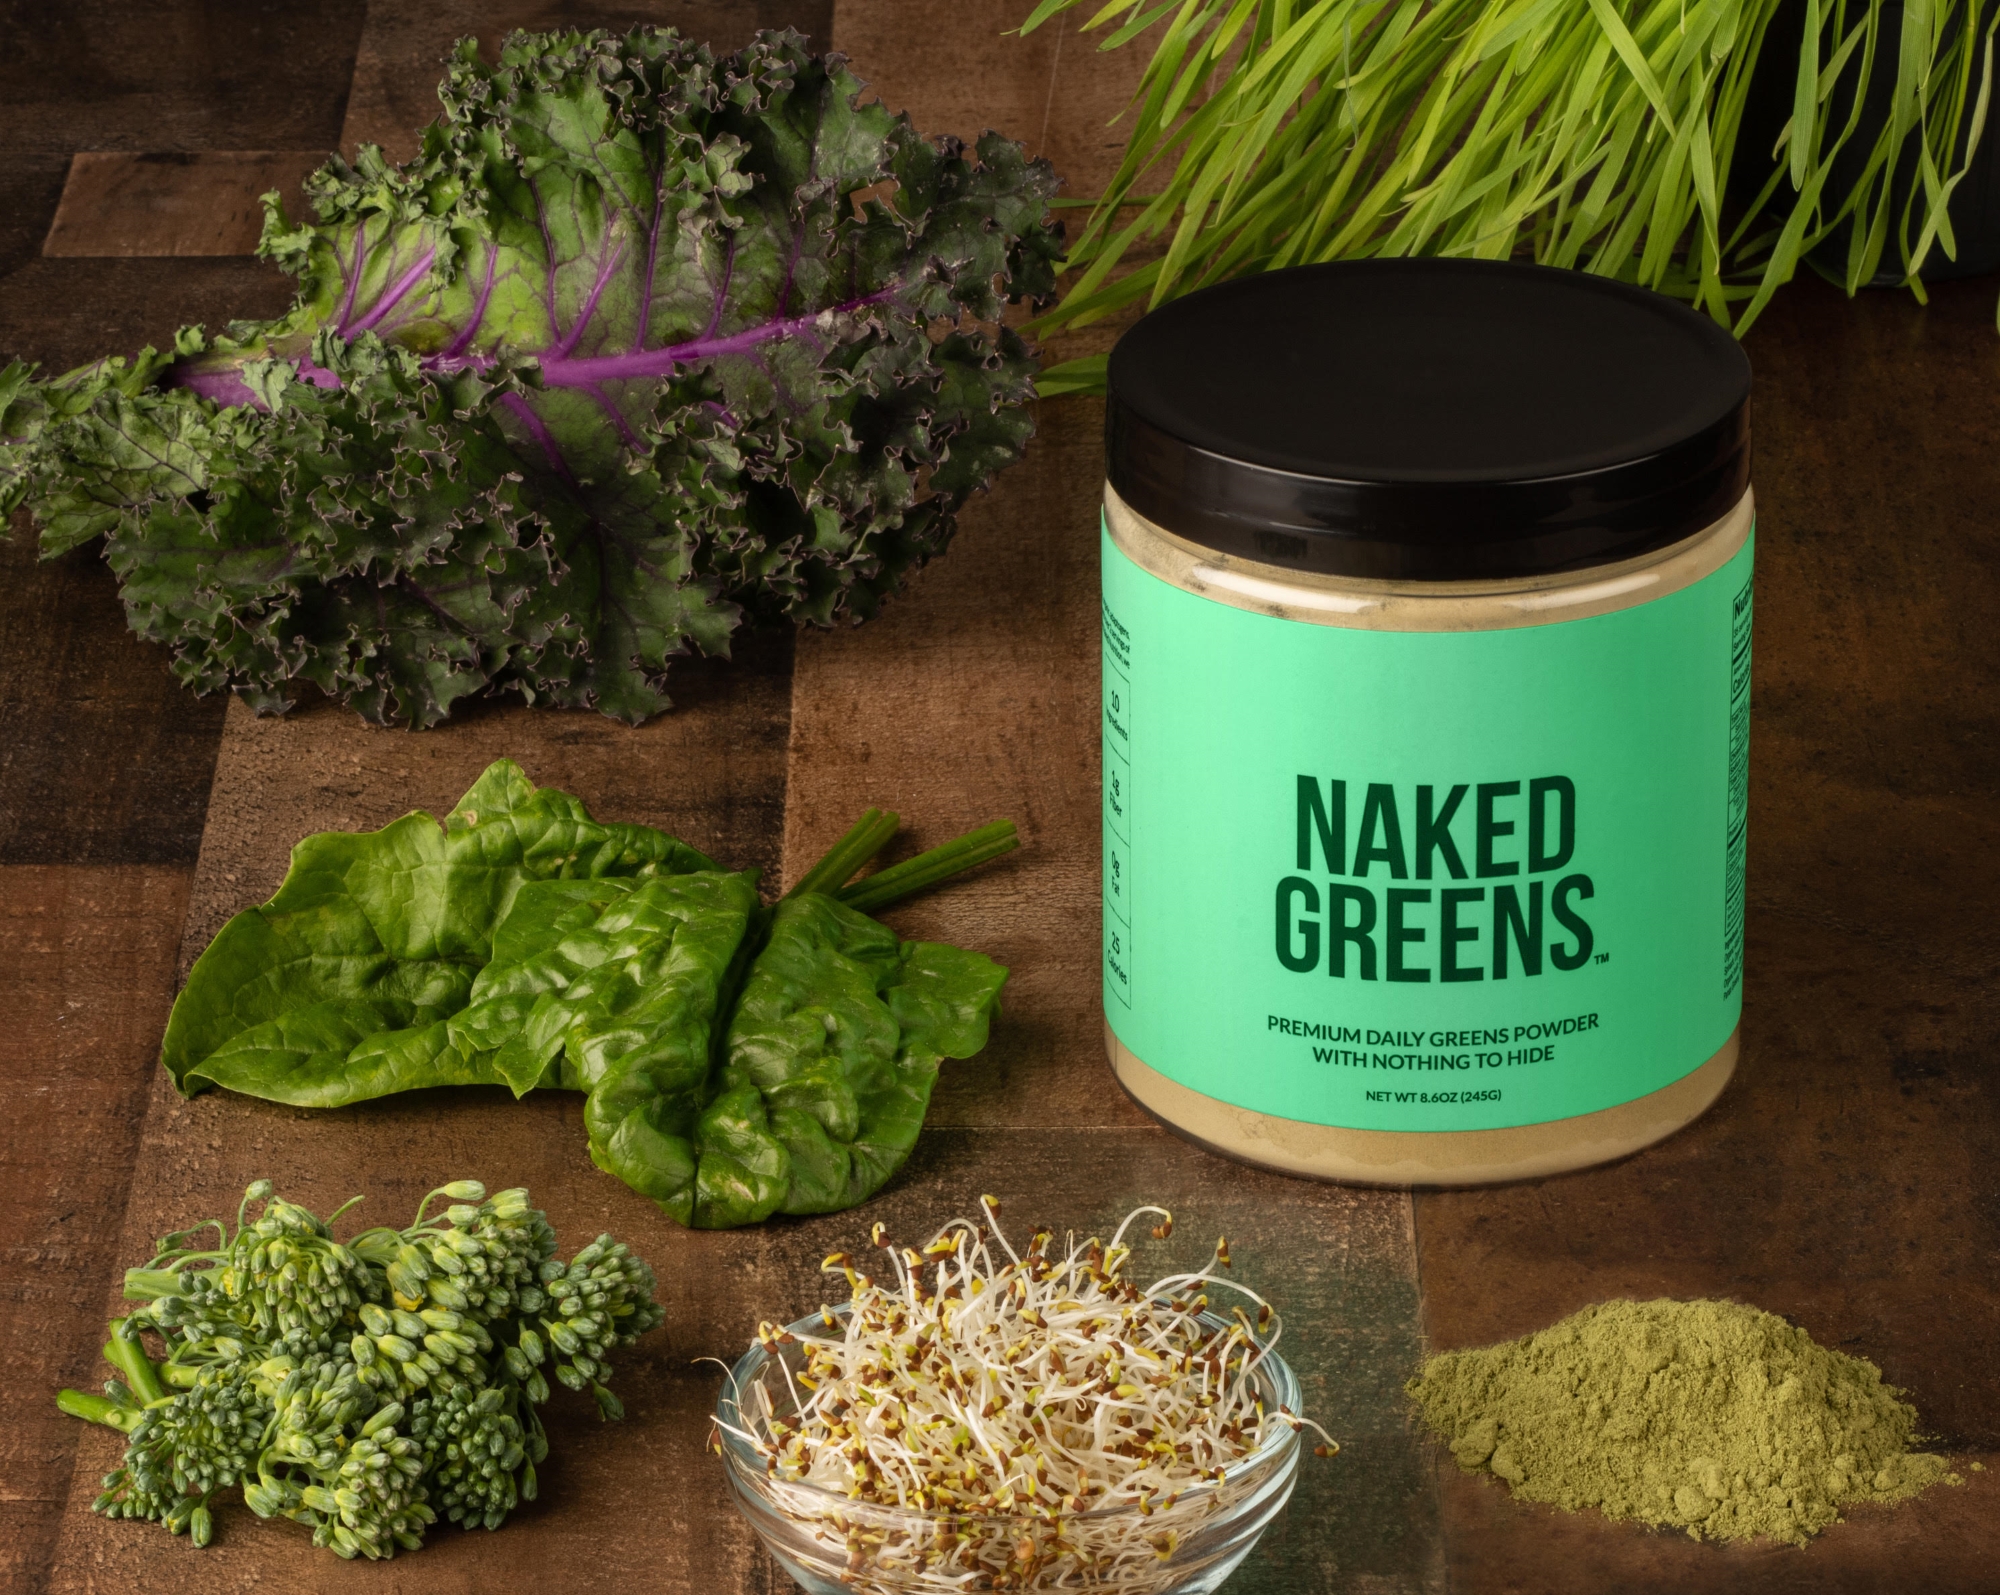 Organic Naked Greens powdered supplement